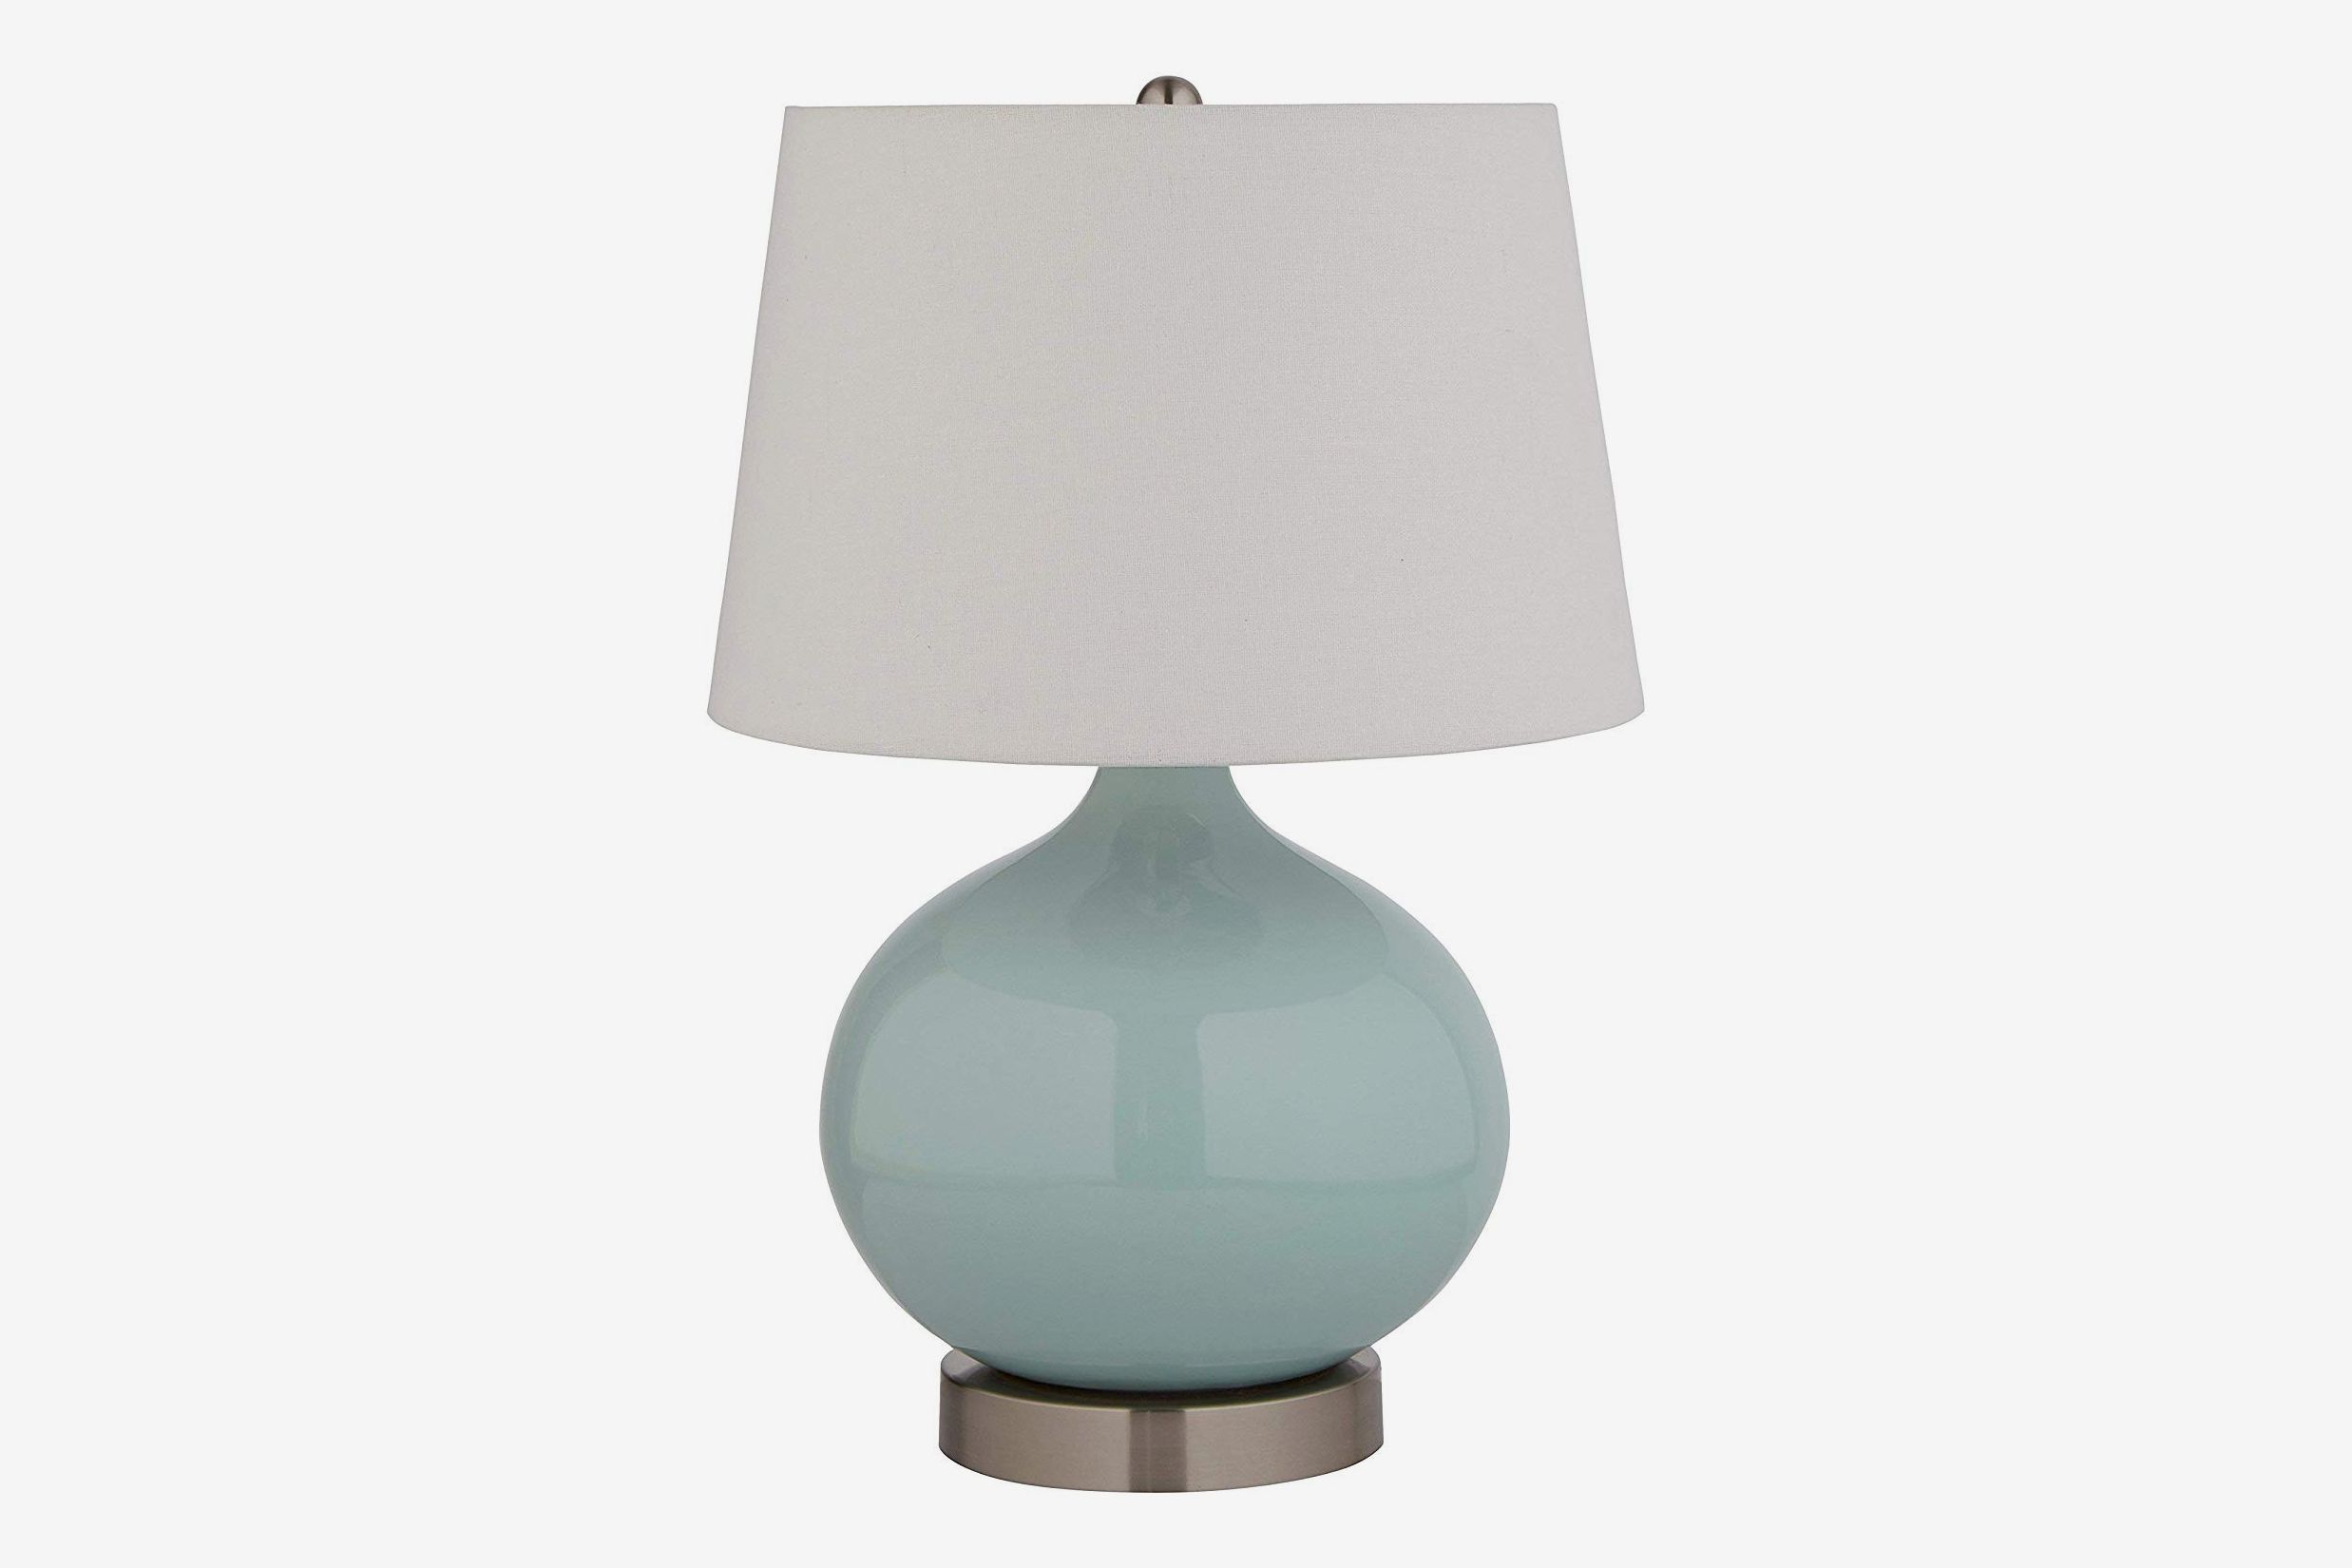 22 Best Bedside Lamps 2021 The Strategist, Top 10 Table Lamps